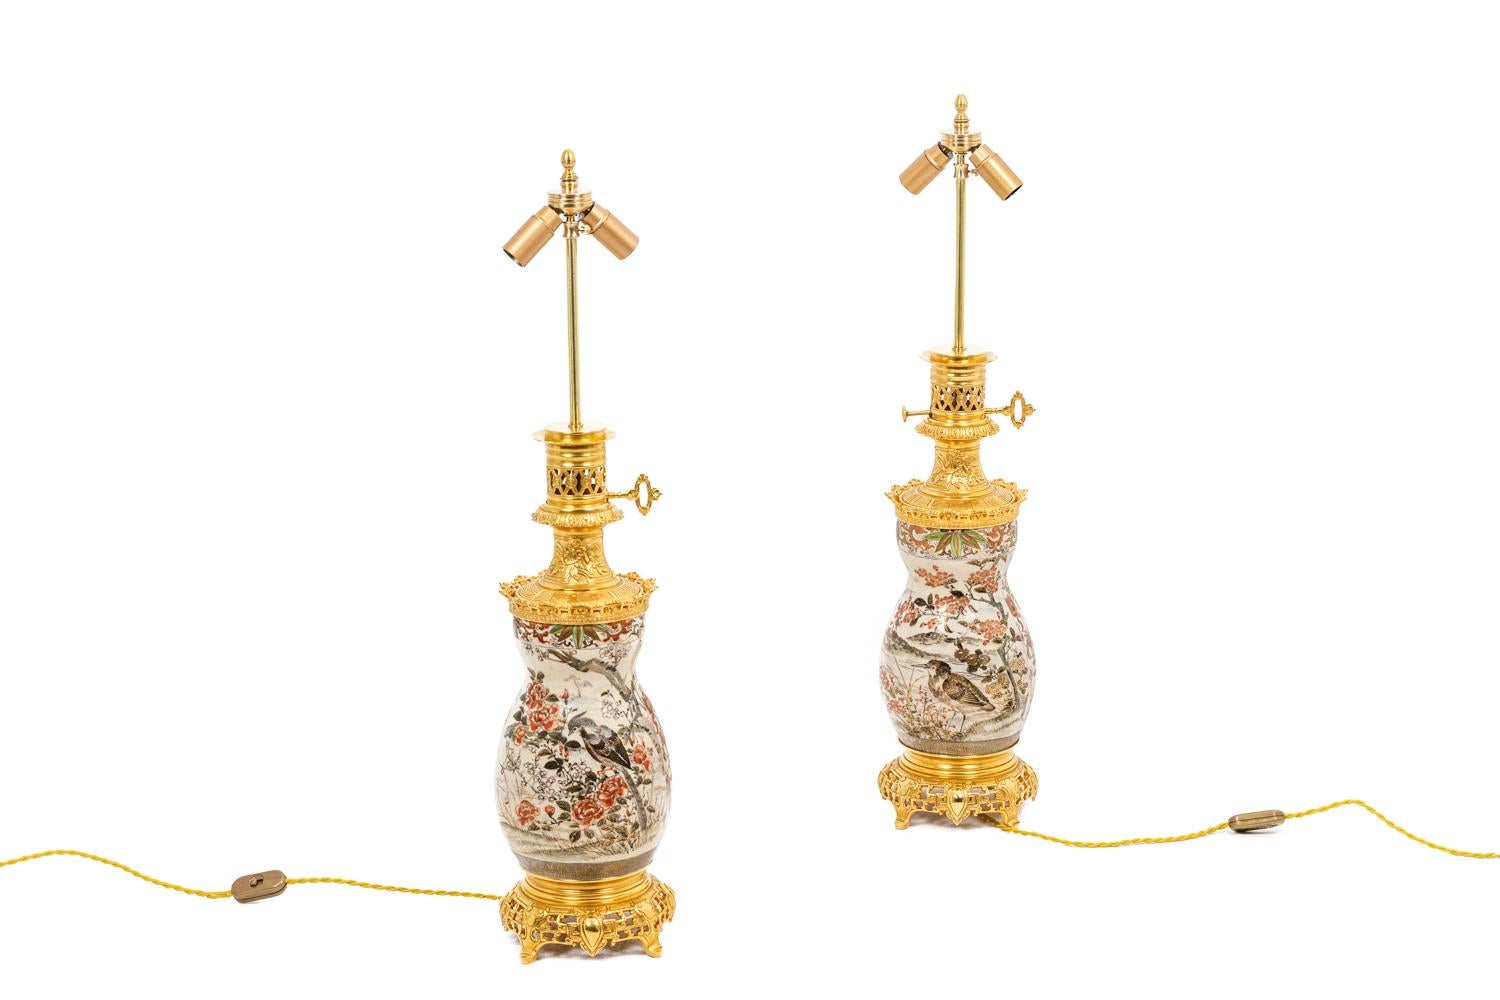 Pair of baluster-shaped lamps in Satsume earthenware with polychromed enamels highlighted with gold on white background. Decor of flowers and birds. Mount in chiseled and gilt bronze circular base in openwork.

Work realized at the end of the 19th